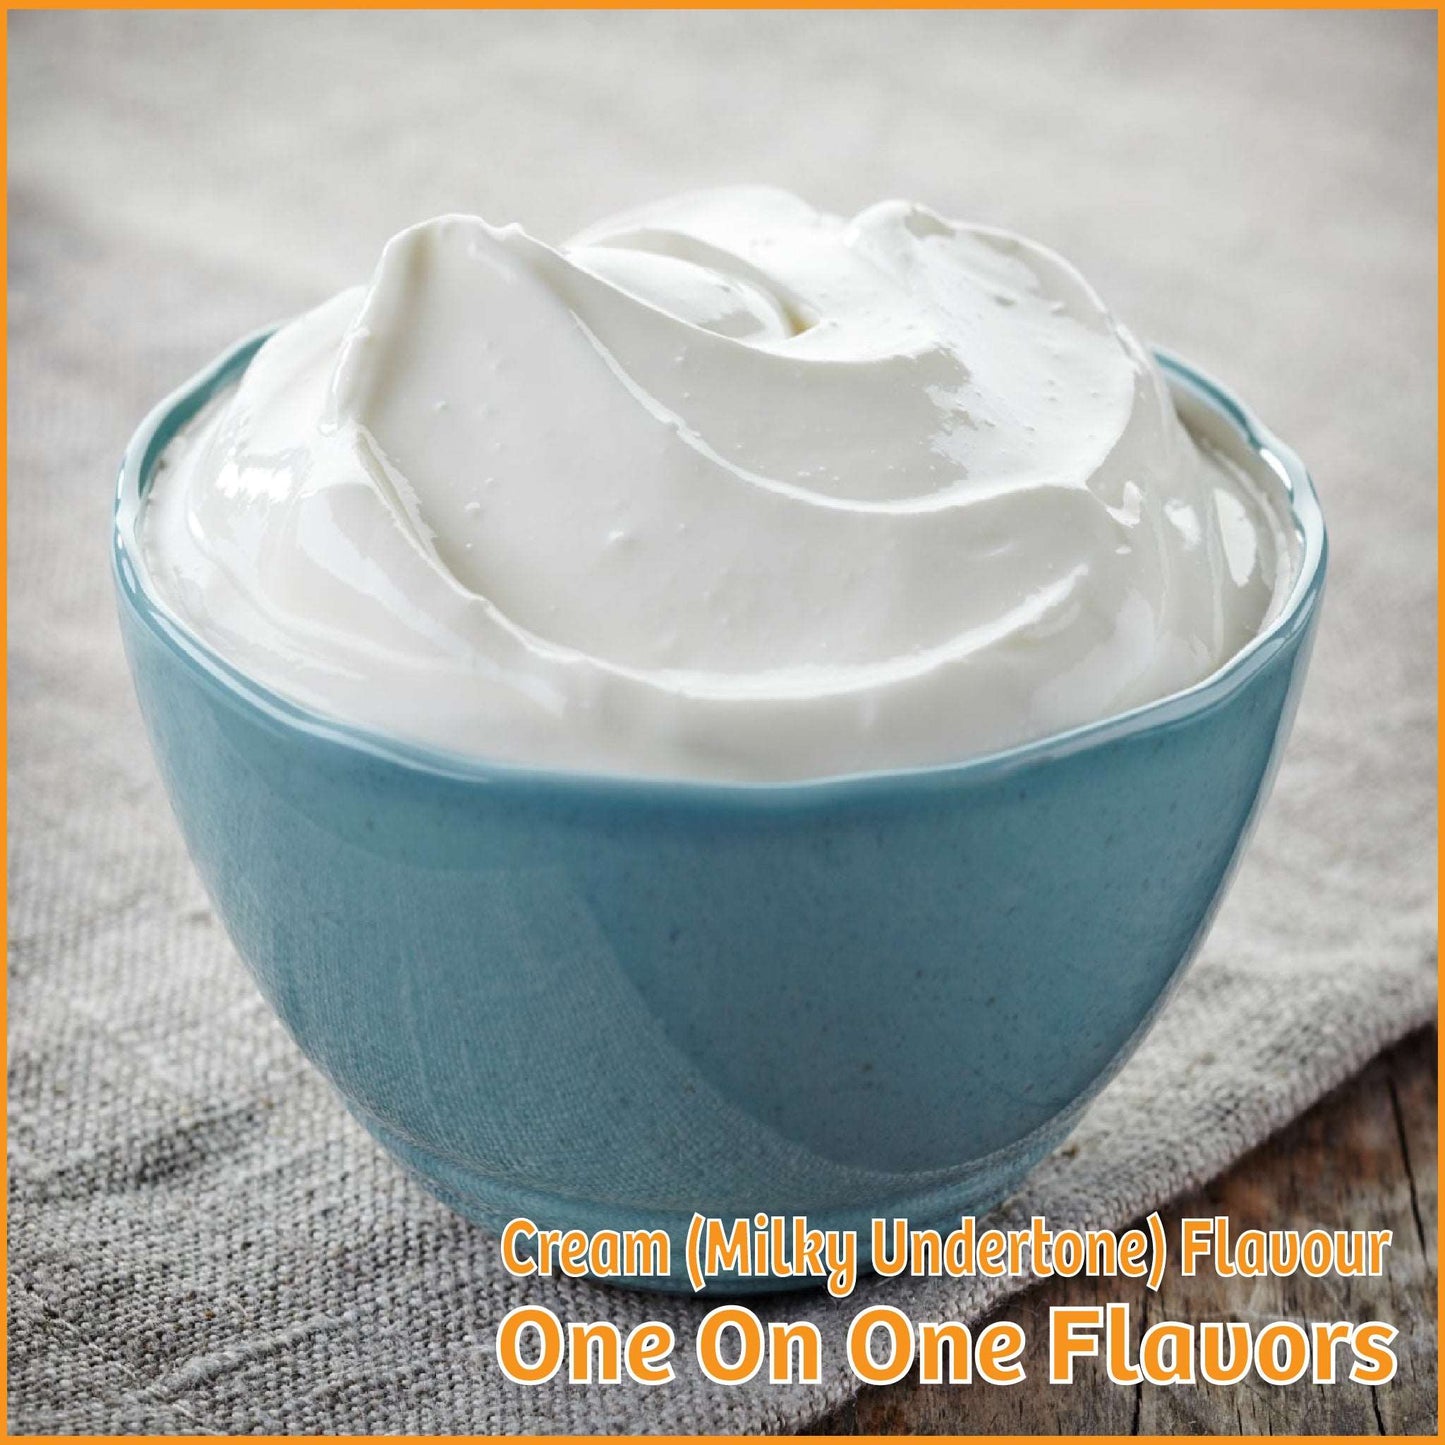 Cream (Milky Undertone) Flavour- One On One Flavors - Flavour Fog - Canada's flavour depot.